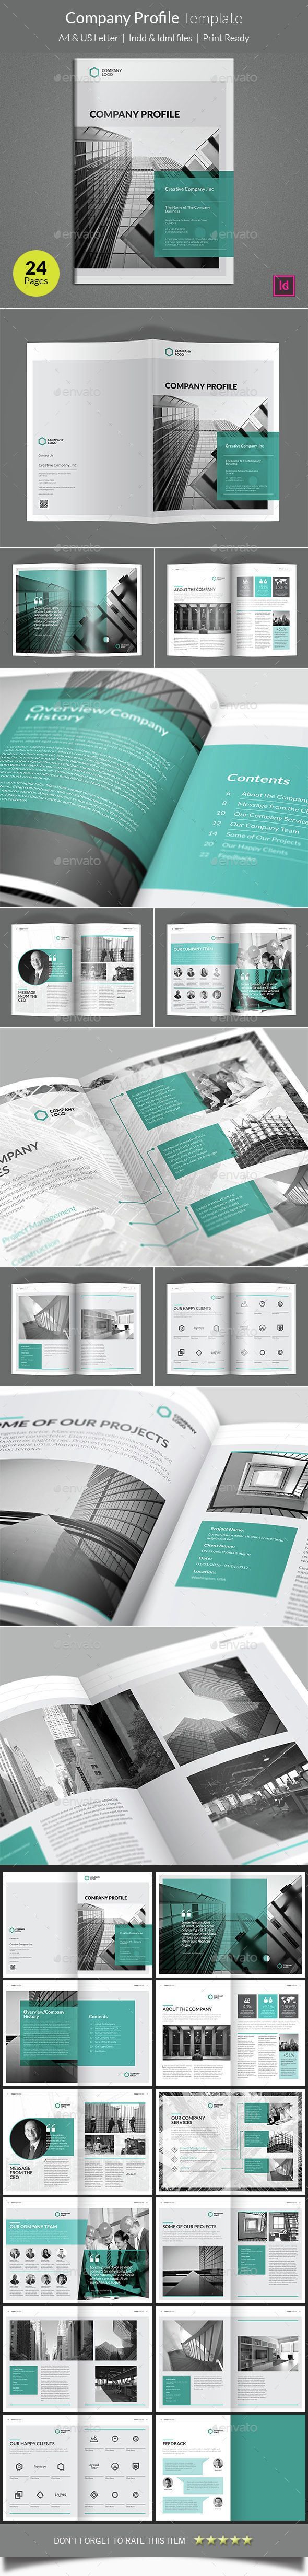 Company Profile Brochure Template InDesign INDD. Download here: graphicriver.net/…